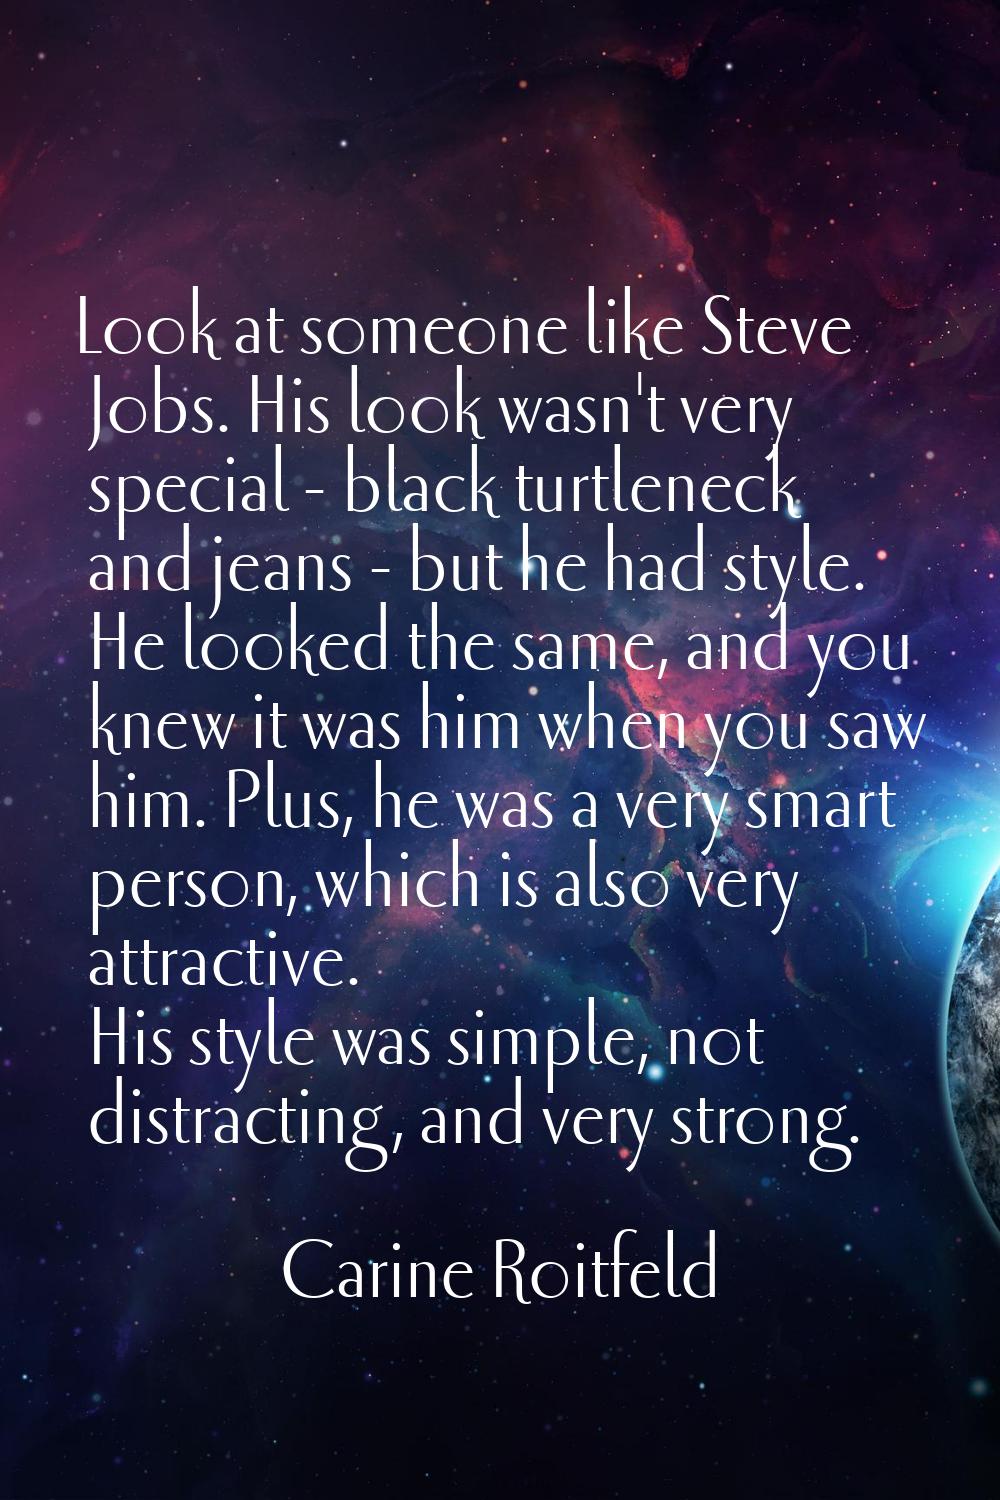 Look at someone like Steve Jobs. His look wasn't very special - black turtleneck and jeans - but he